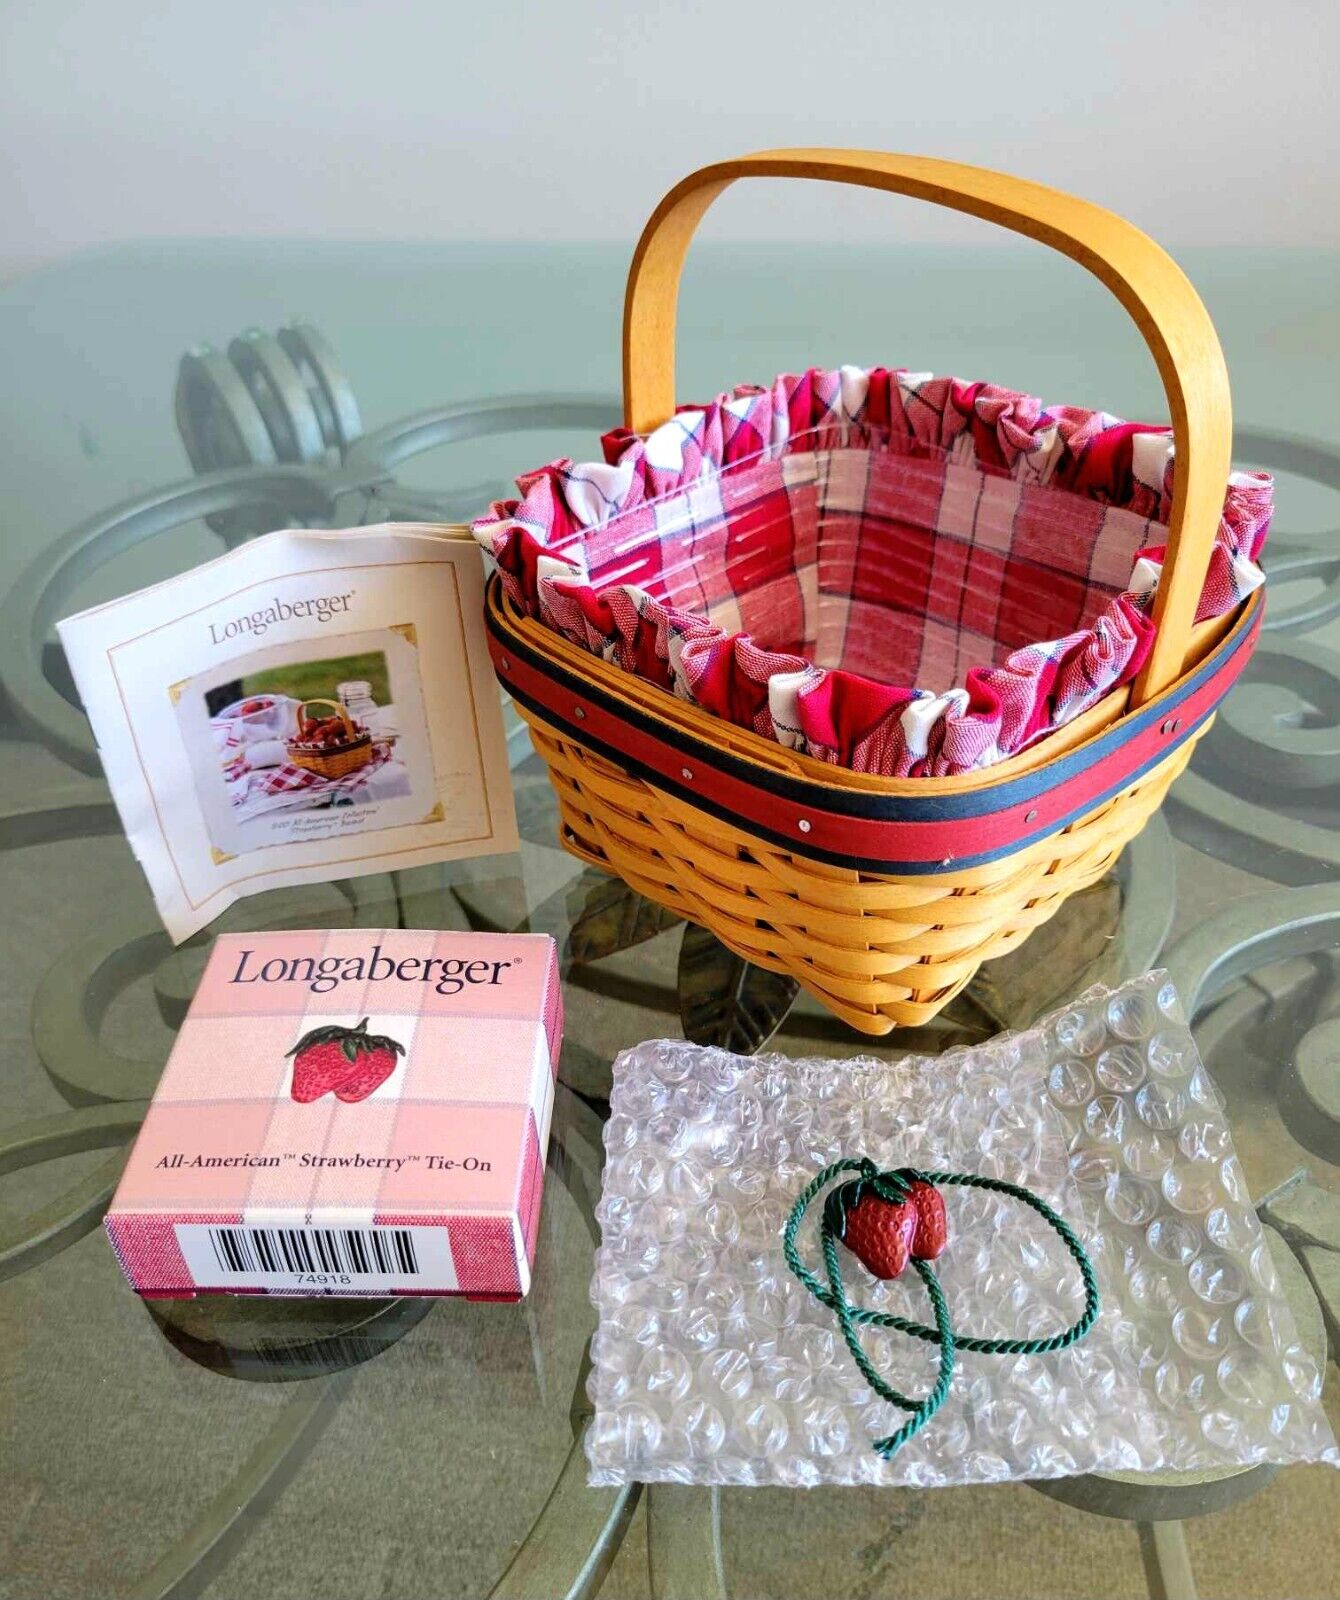 2001 Longaberger All American Strawberry Basket w/Liner, Protector and Tie On